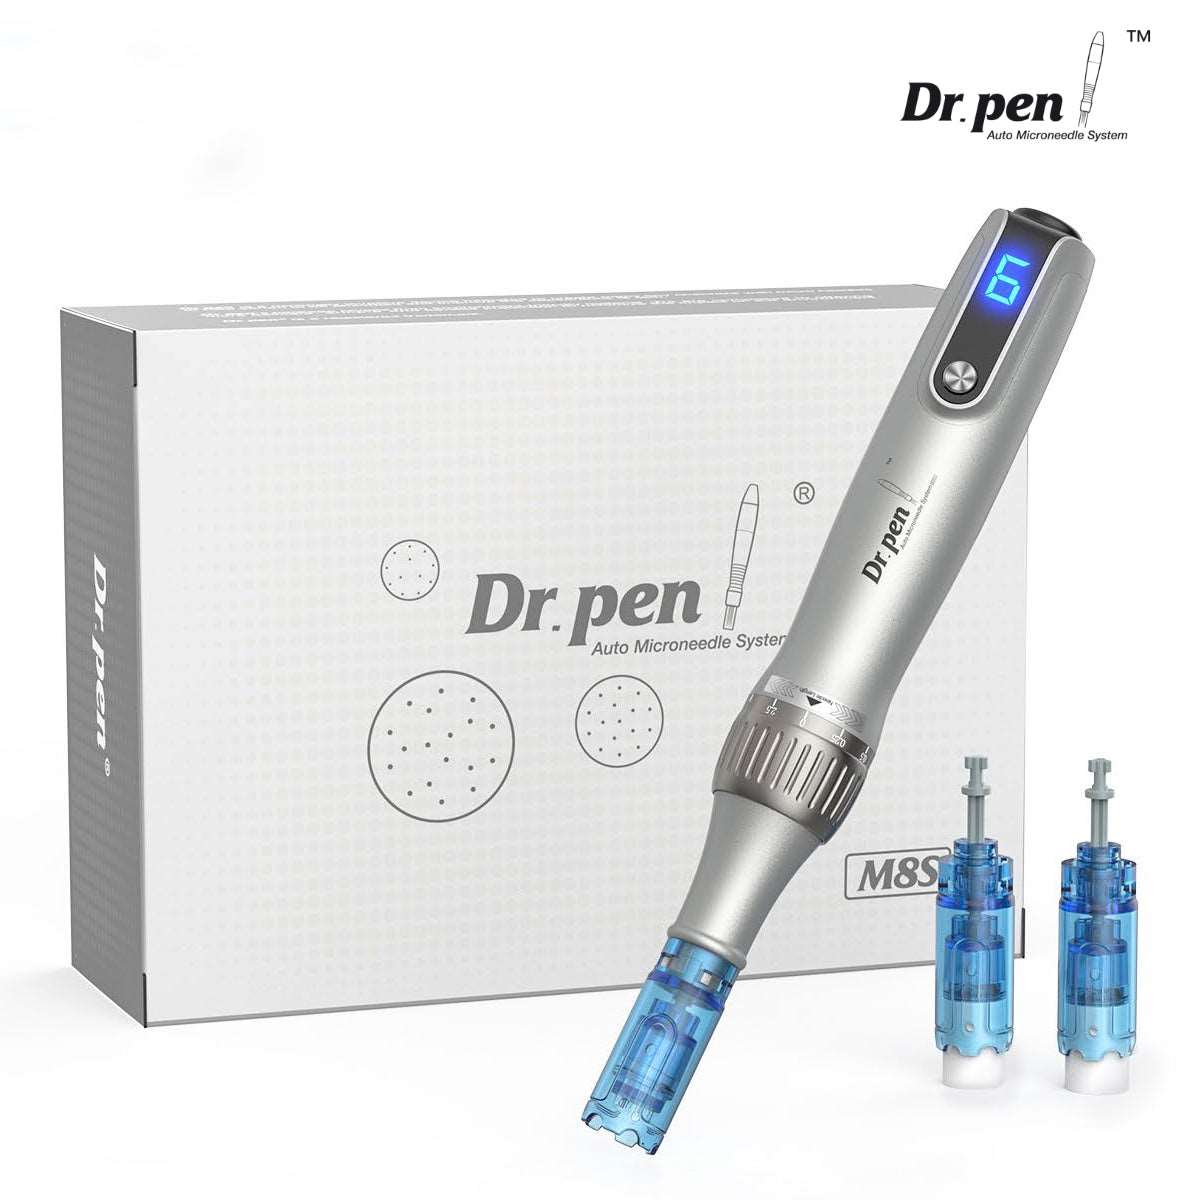 How to Microneedle at Home Safely With Dr. Pen: A Comprehensive